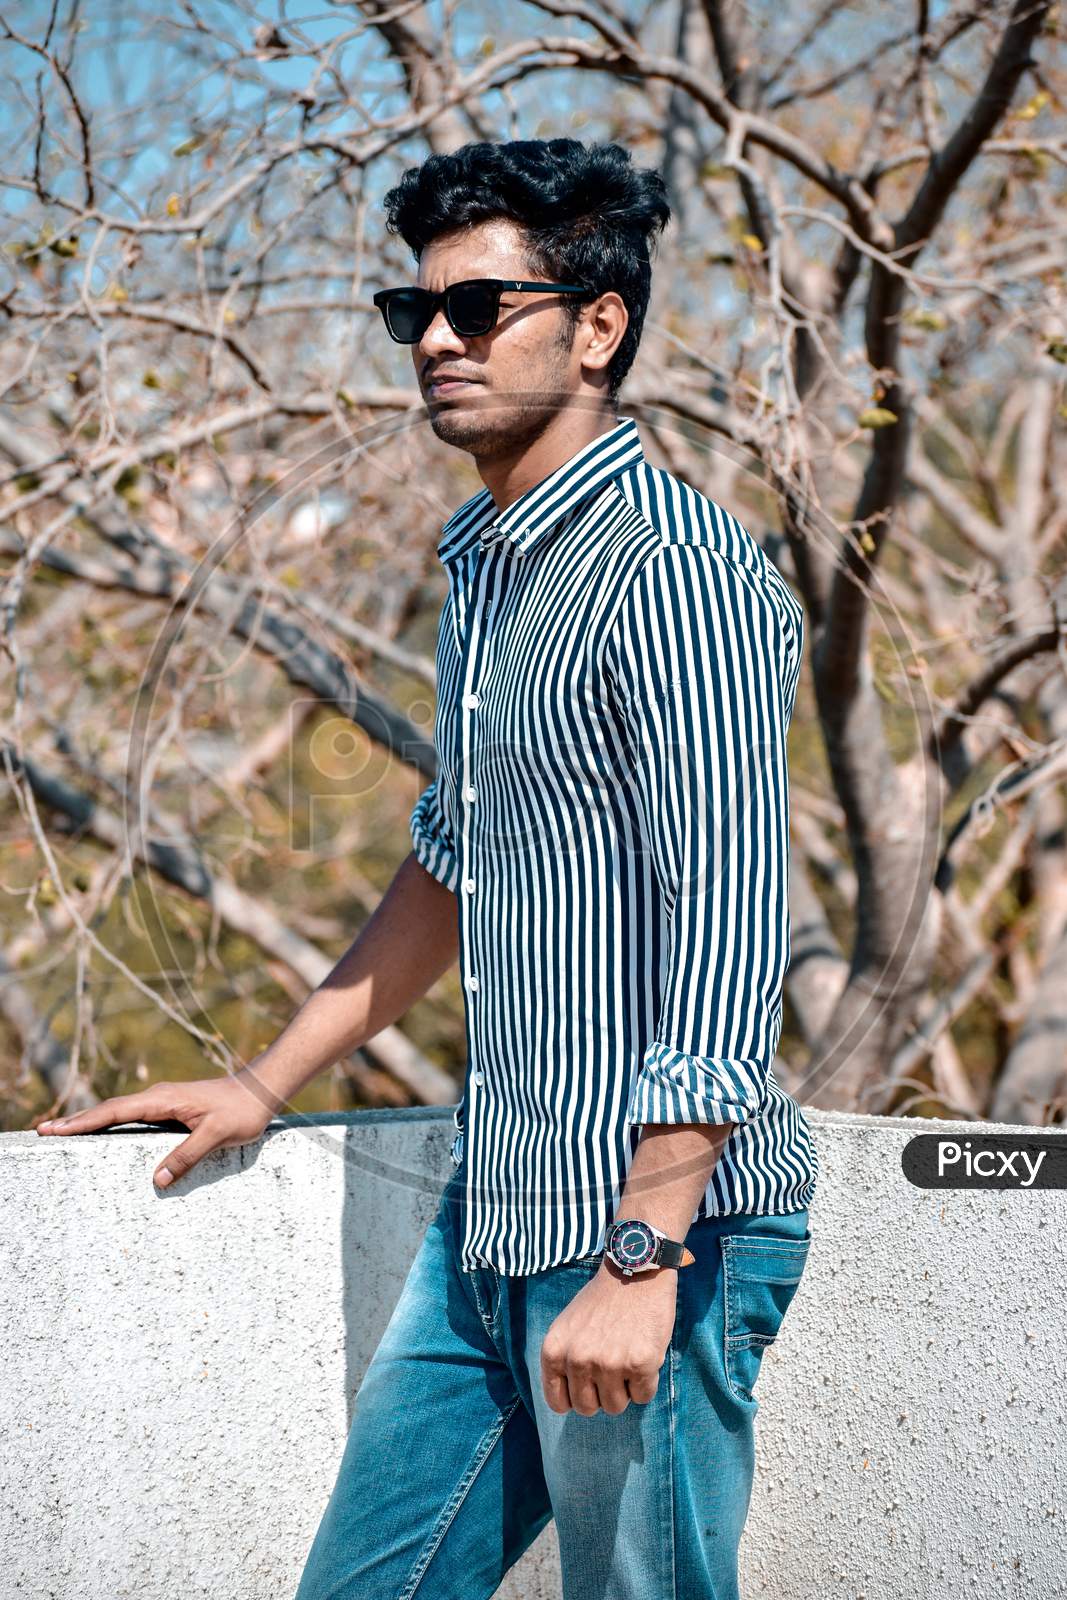 Stylish man standing for a photoshoot wearing sunglasses